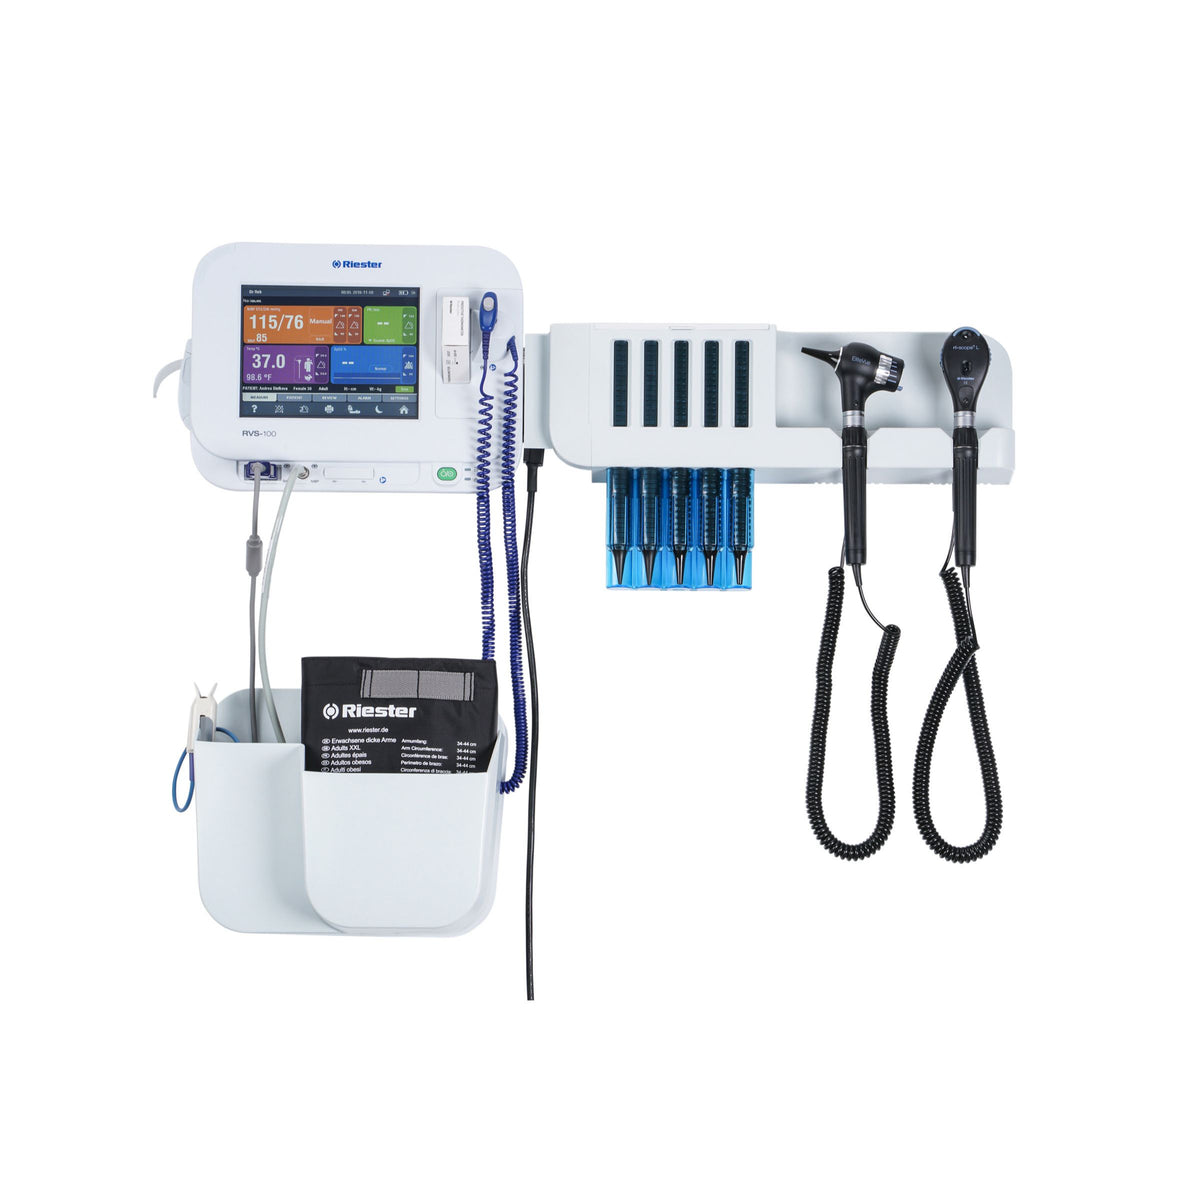 Riester RVS-200 Integrated Modular Wall Diagnostic Station with VSM, without Diagnostic Heads